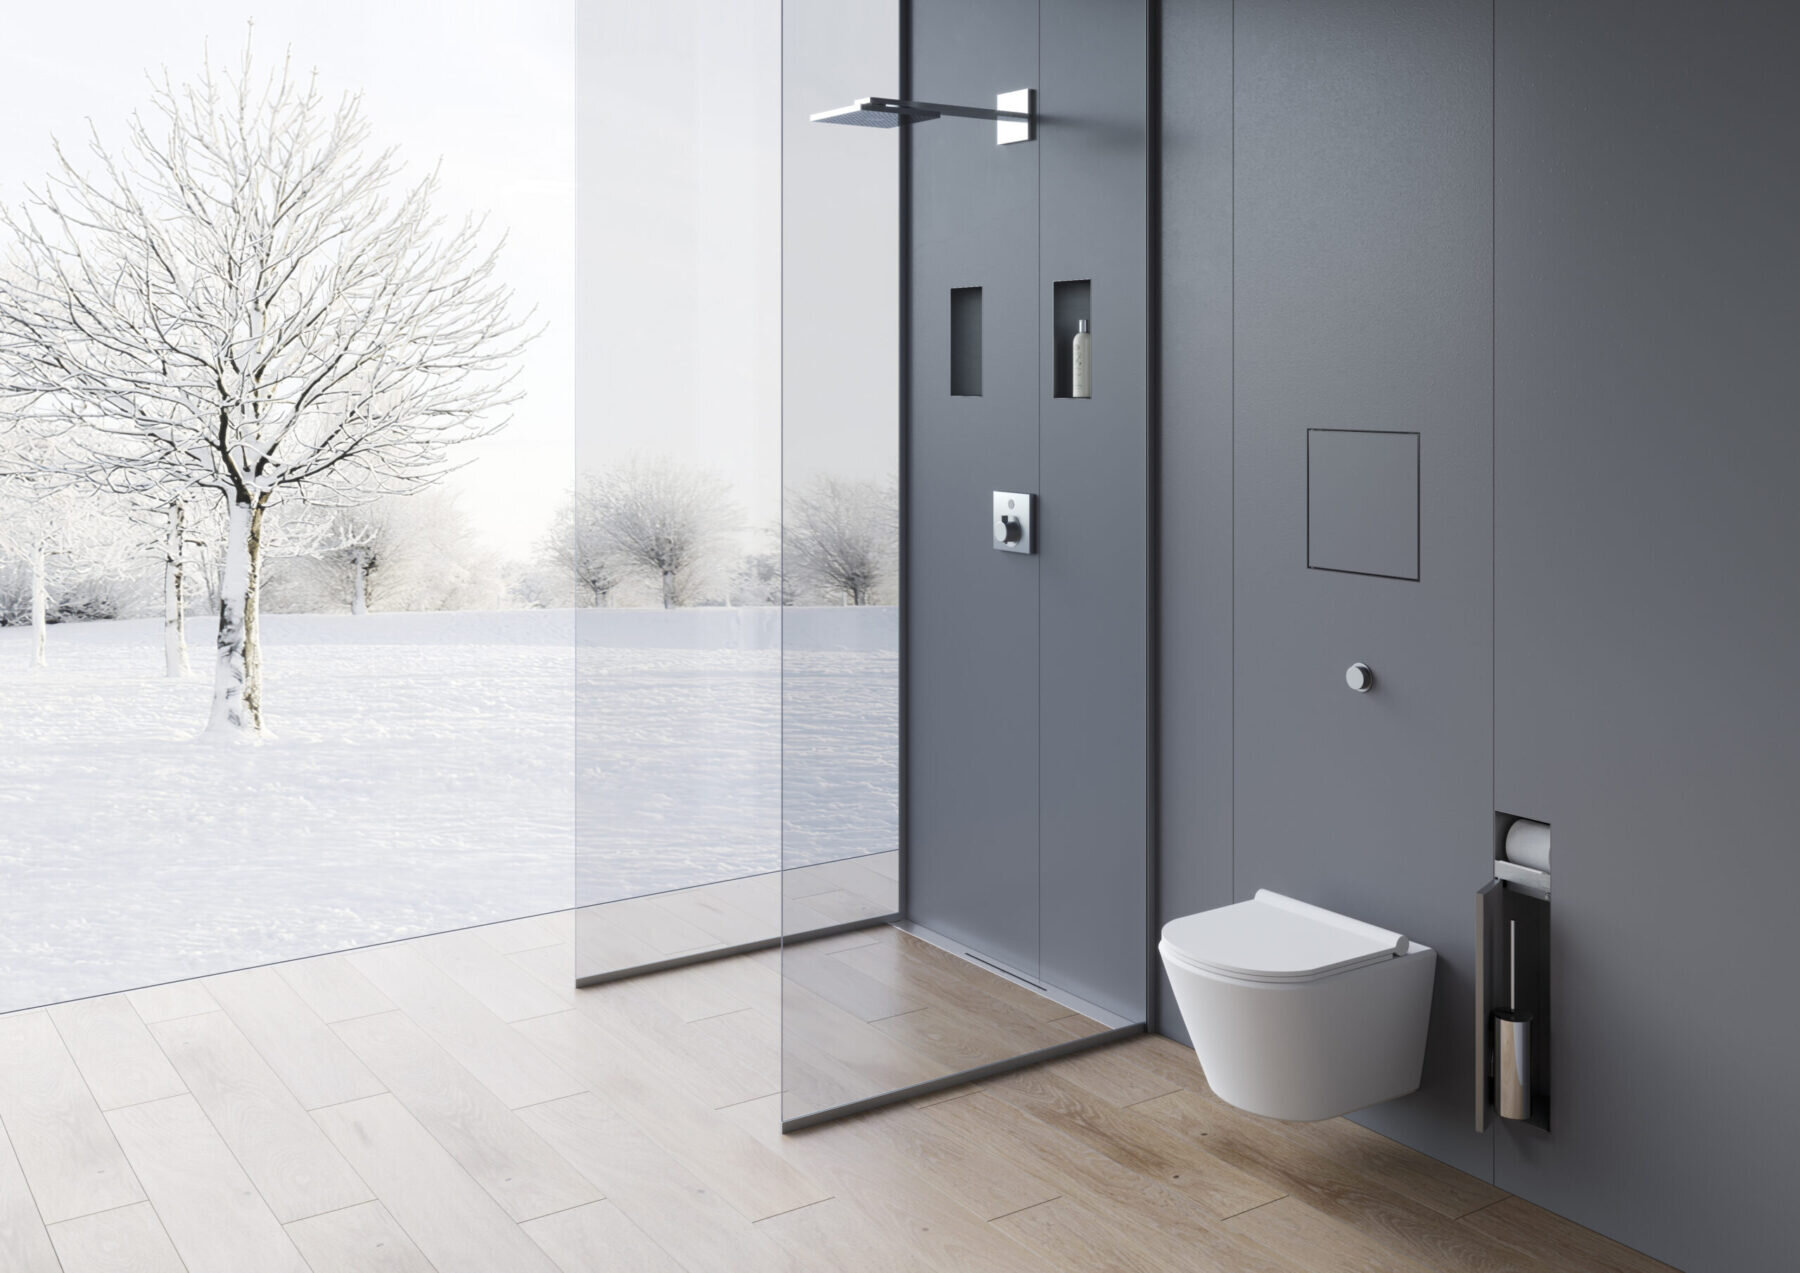 product-combinations_mood-bathroom_easy-drain_container_r-line-waterstop-wall_tcl-9_t-box_c-box_anthracite_03-scaled-1800x0-c-center.jpeg